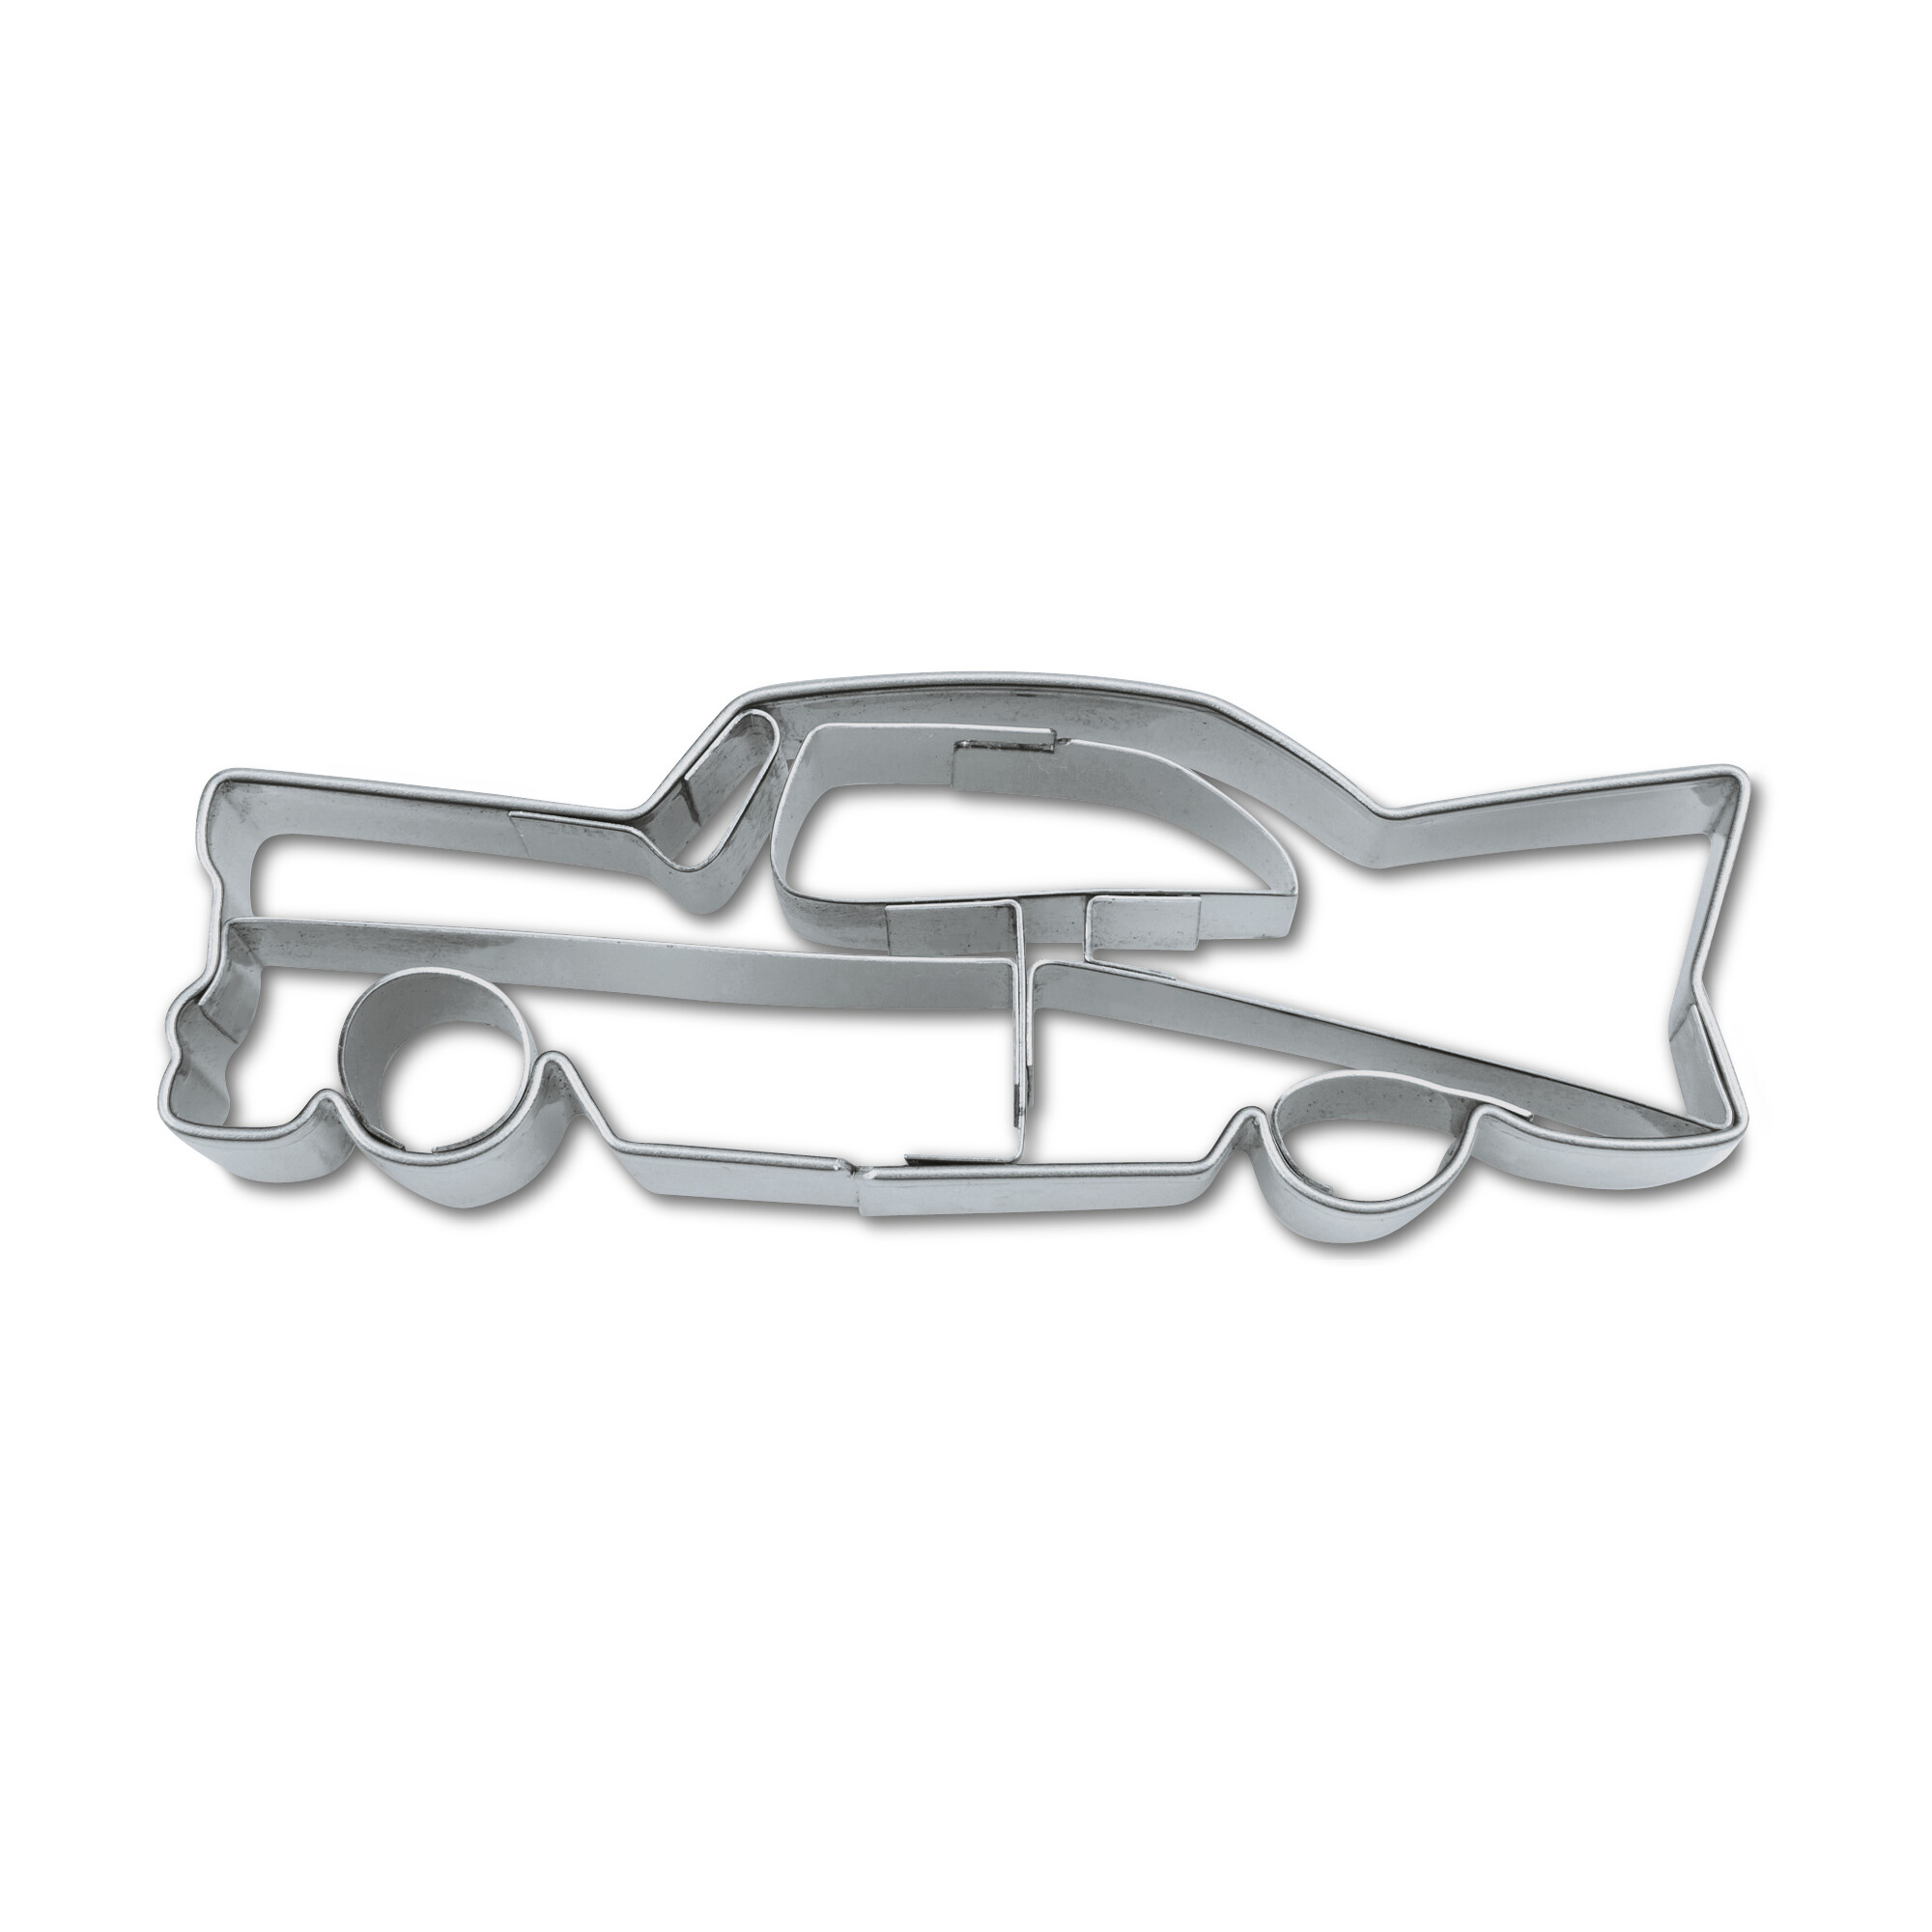 Cookie cutter with stamp – Chevy